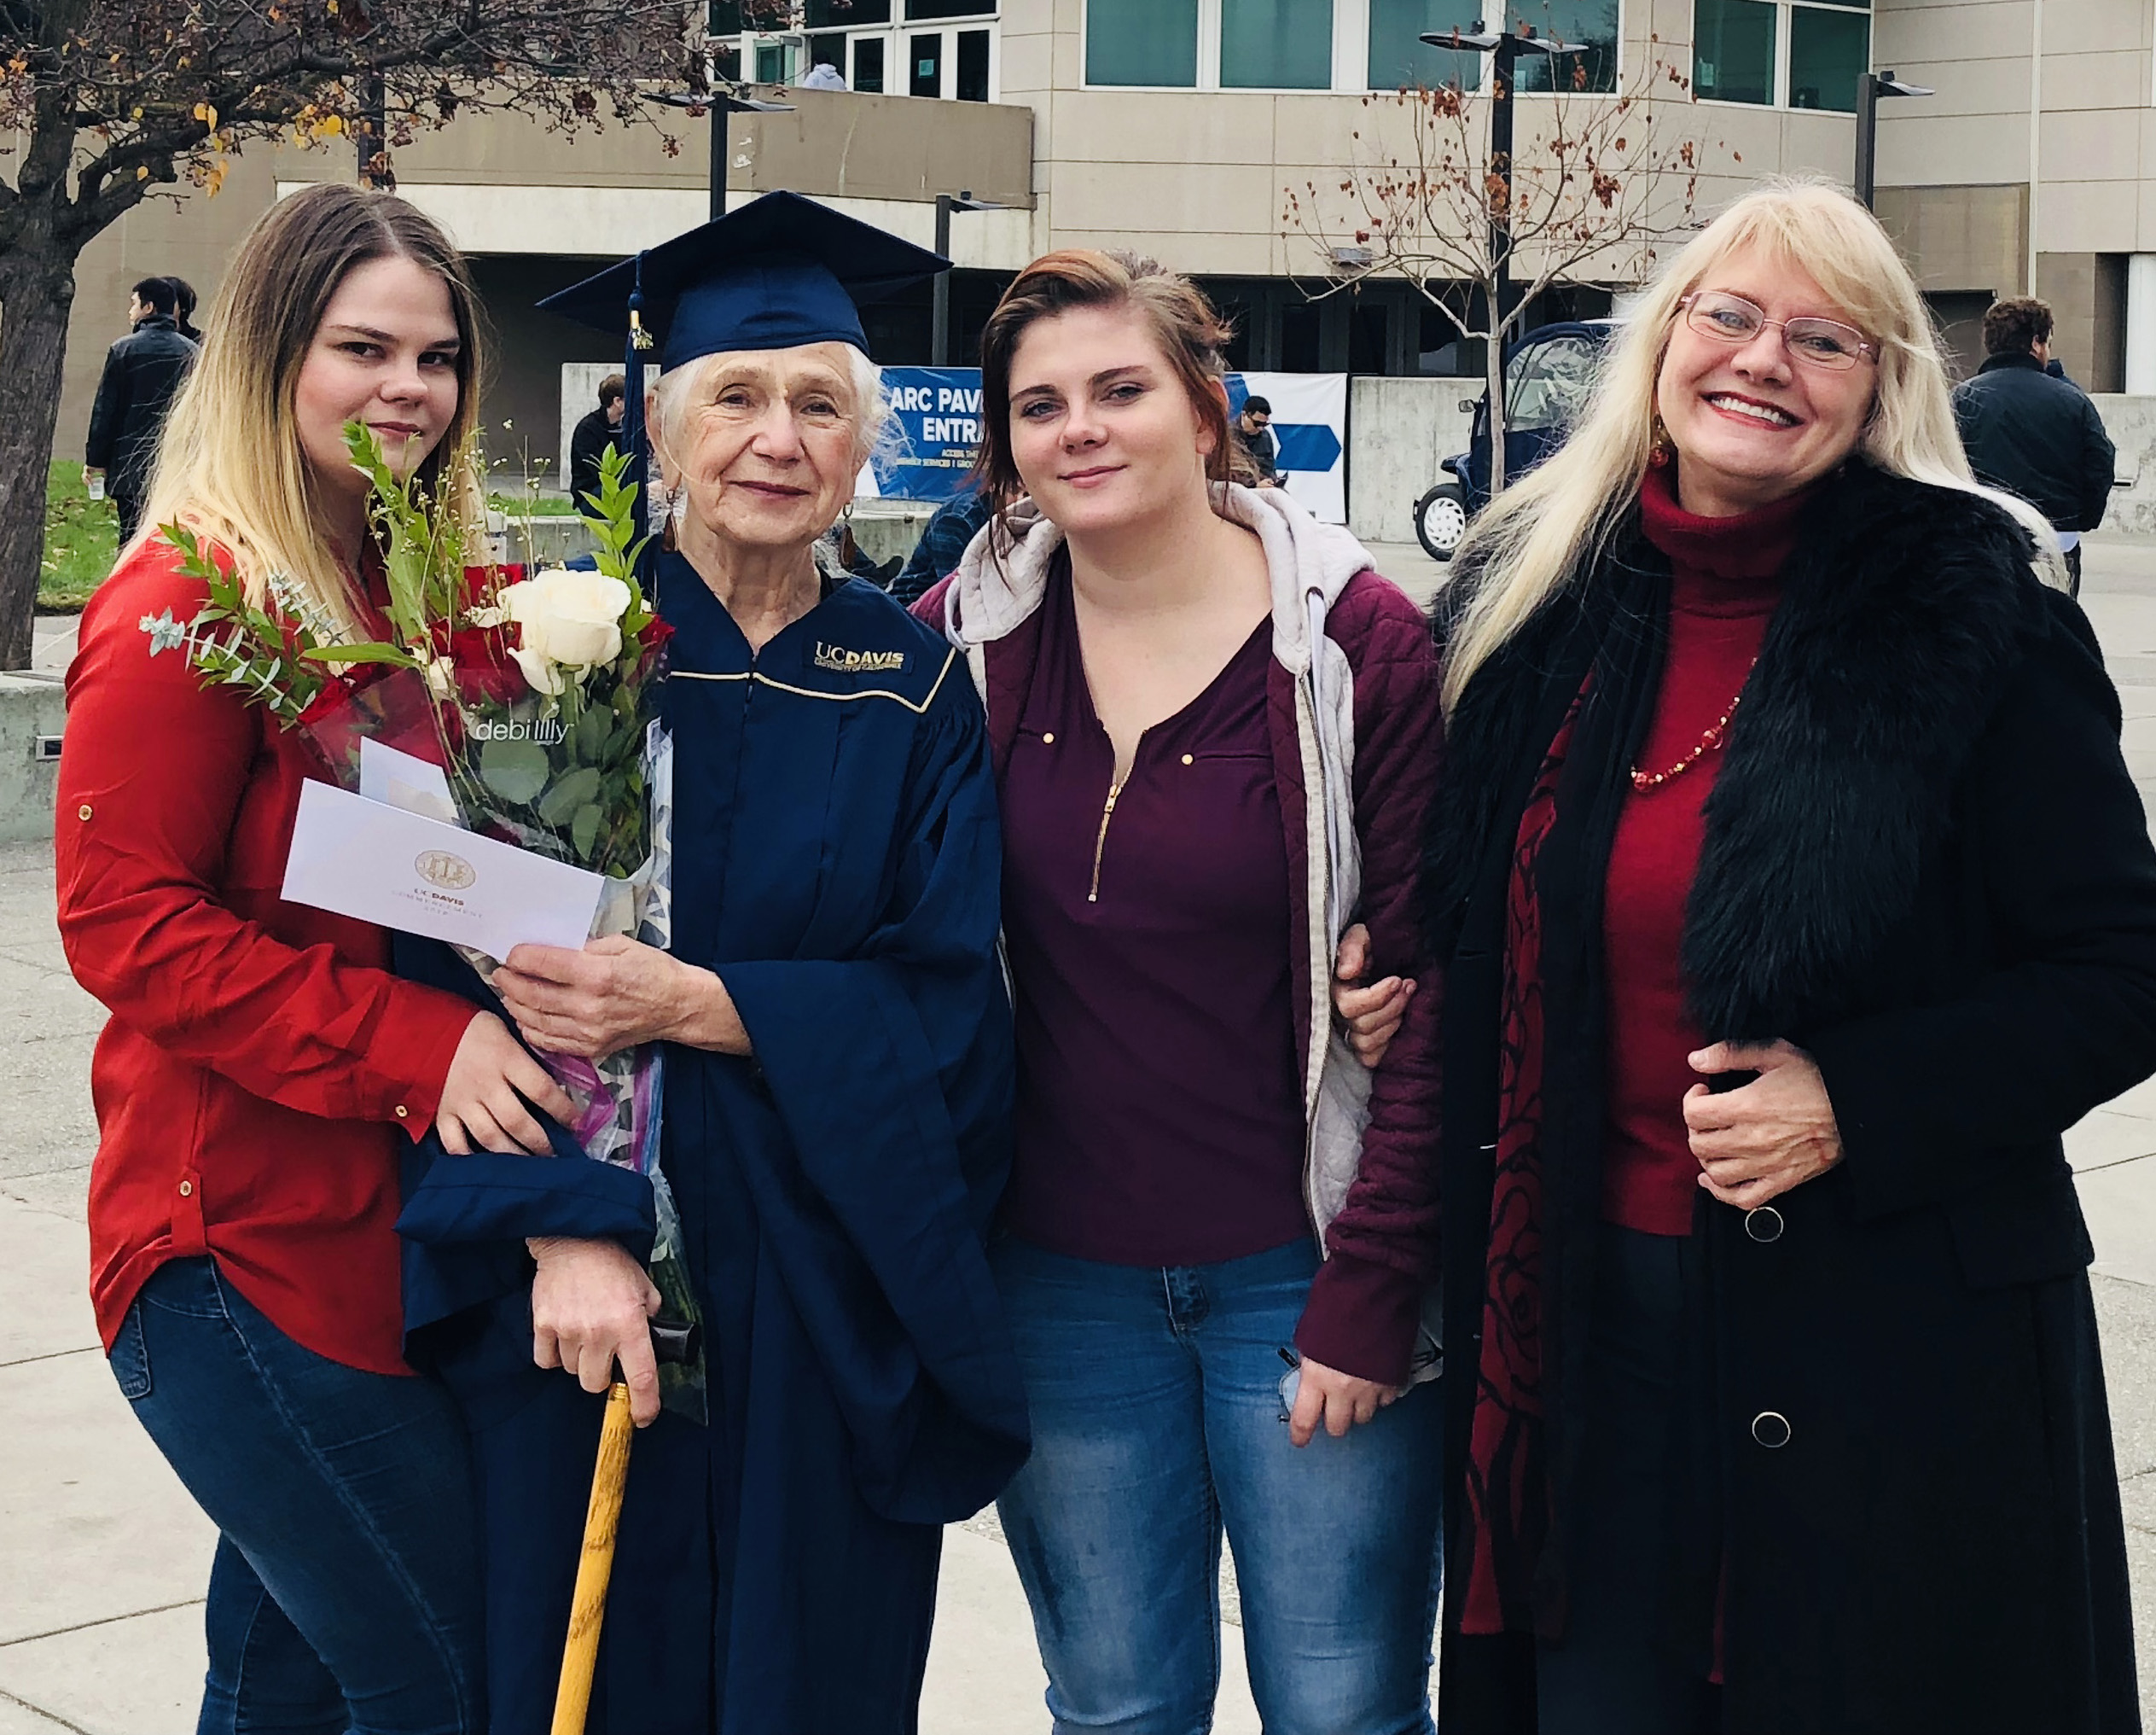 Photo of Marianna Daniel in cap and gown with her family in front of the UC Davis ARC Pavilion